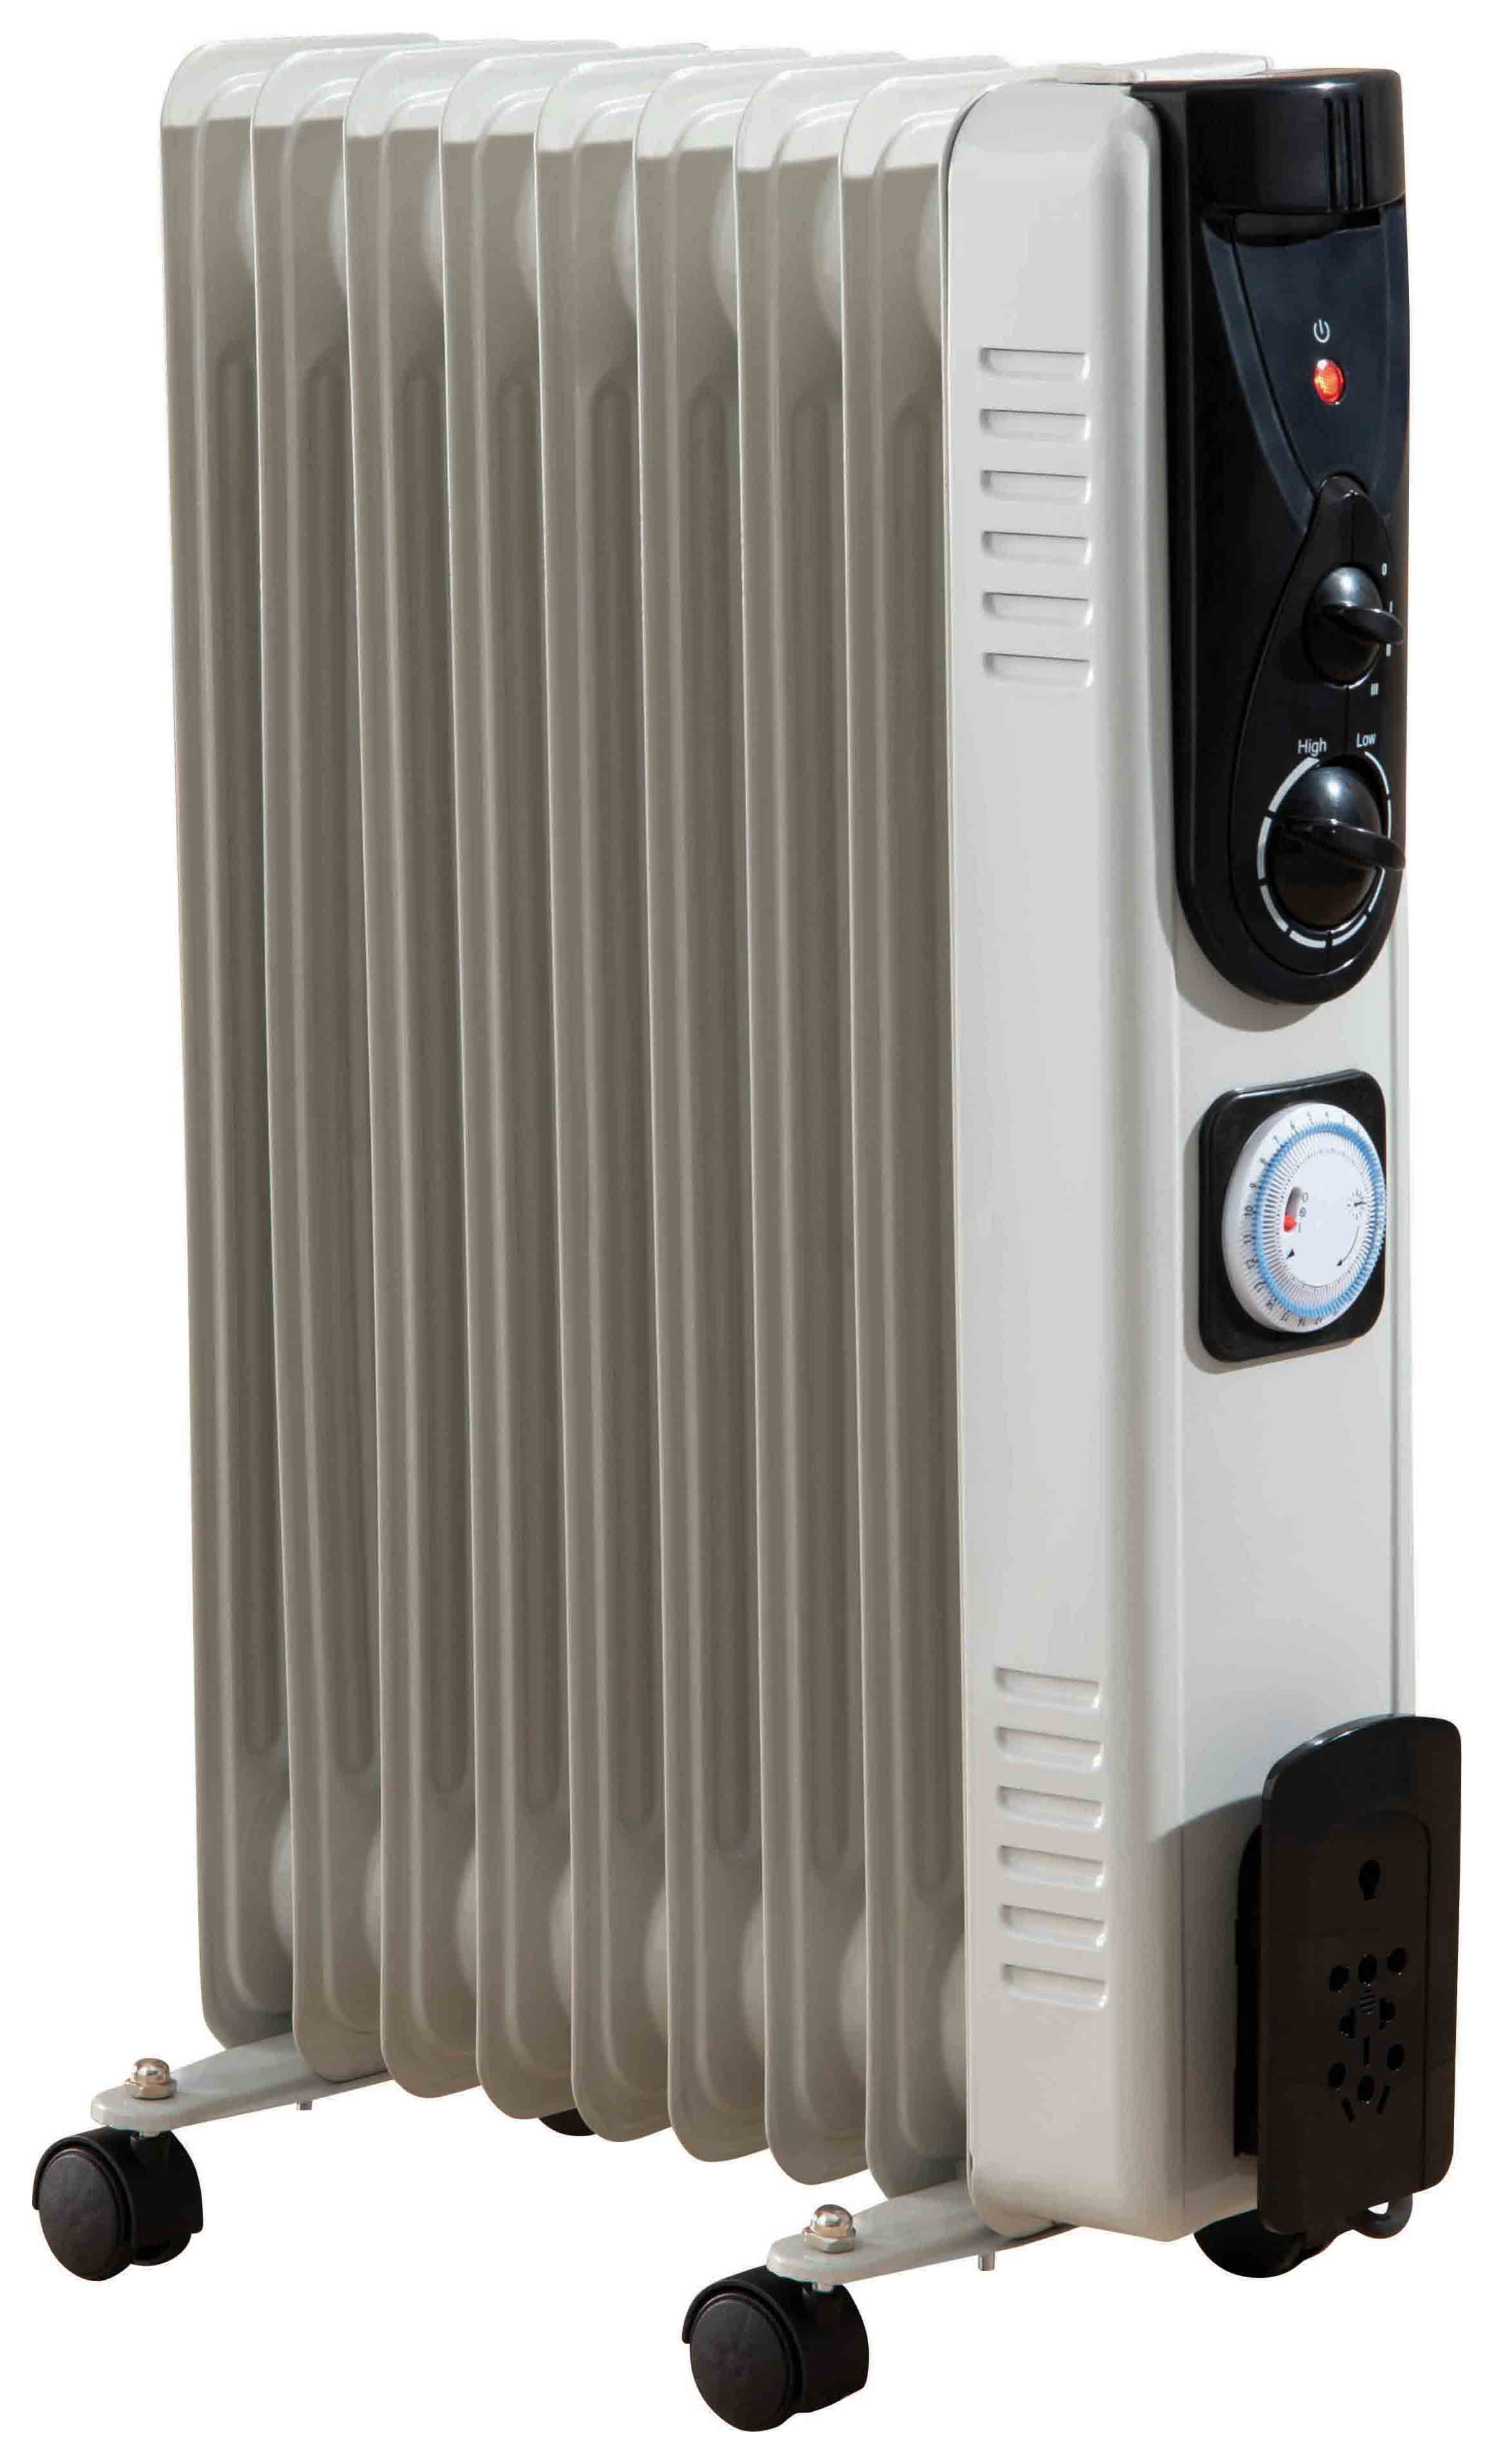 Image of Fine Elements Oil Filled Radiator 2kw - White